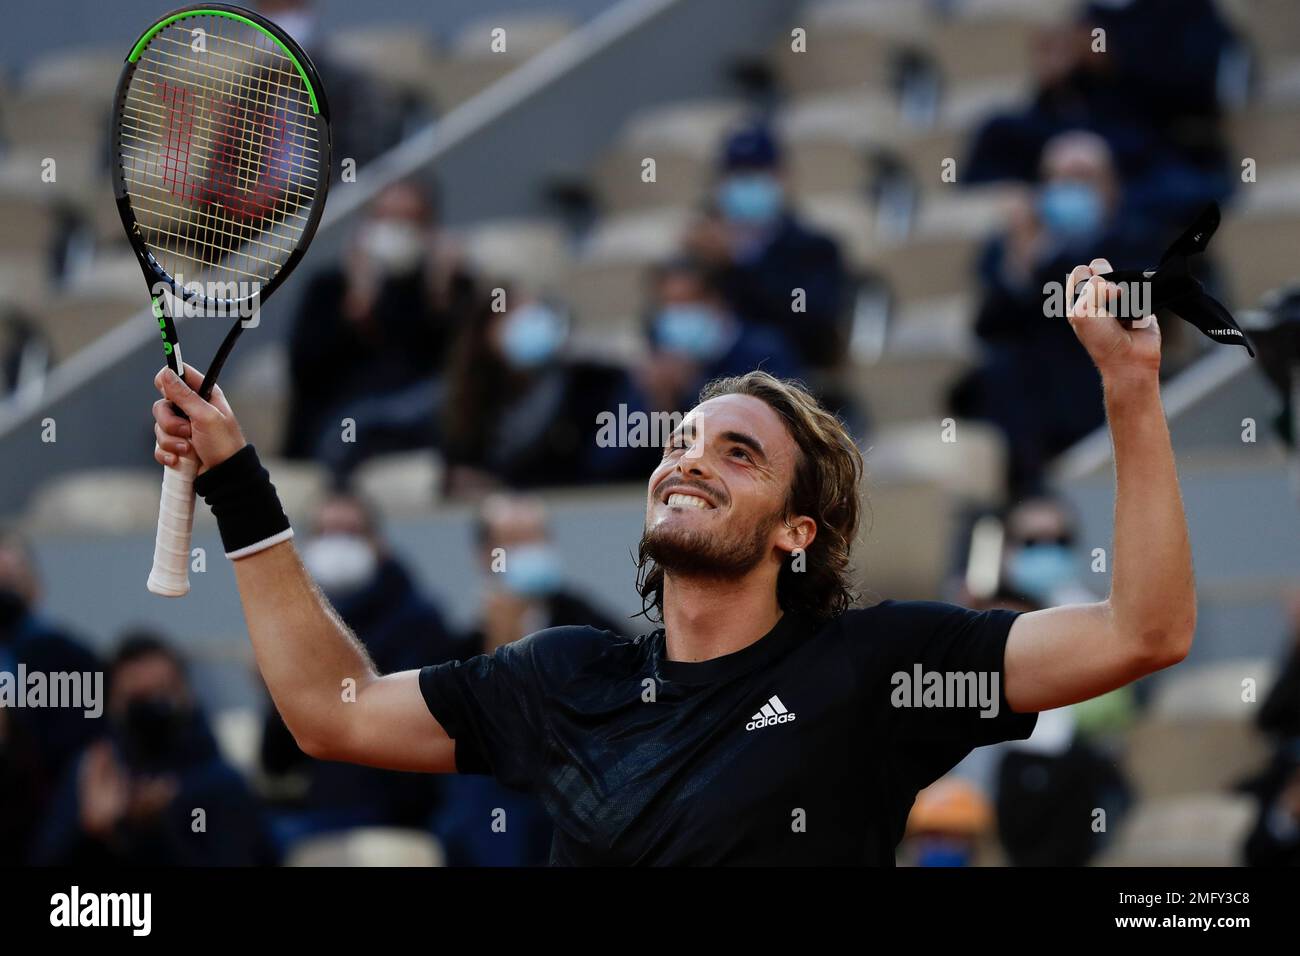 Greeces Stefanos Tsitsipas celebrates winning his quarterfinal match of the French Open tennis tournament against Russias Andrey Rublev in three sets, 7-5, 6-2, 6-3, at the Roland Garros stadium in Paris, France,